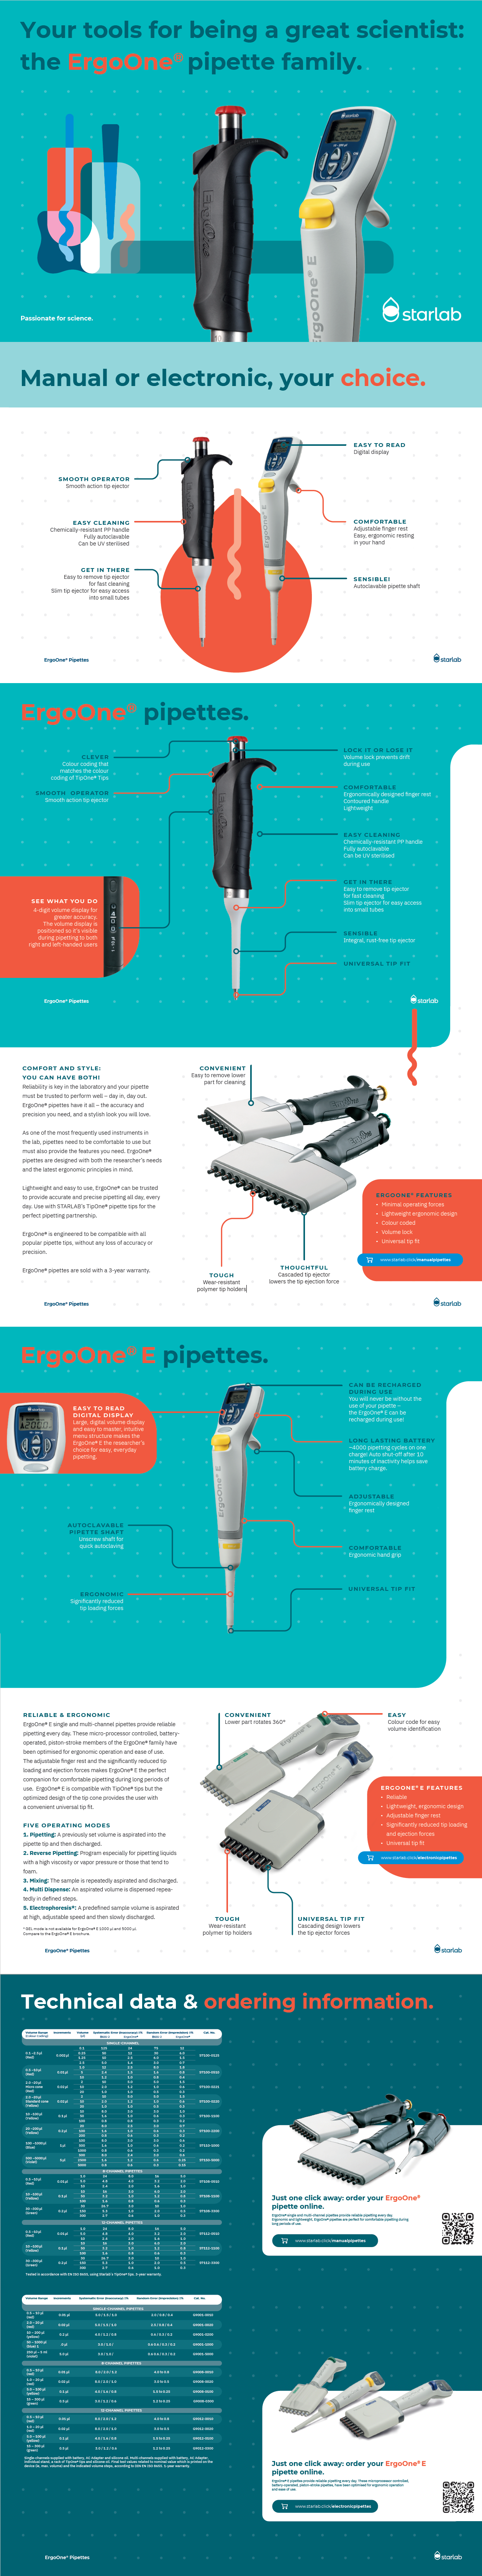 PIPETTEOVERVIEW.png